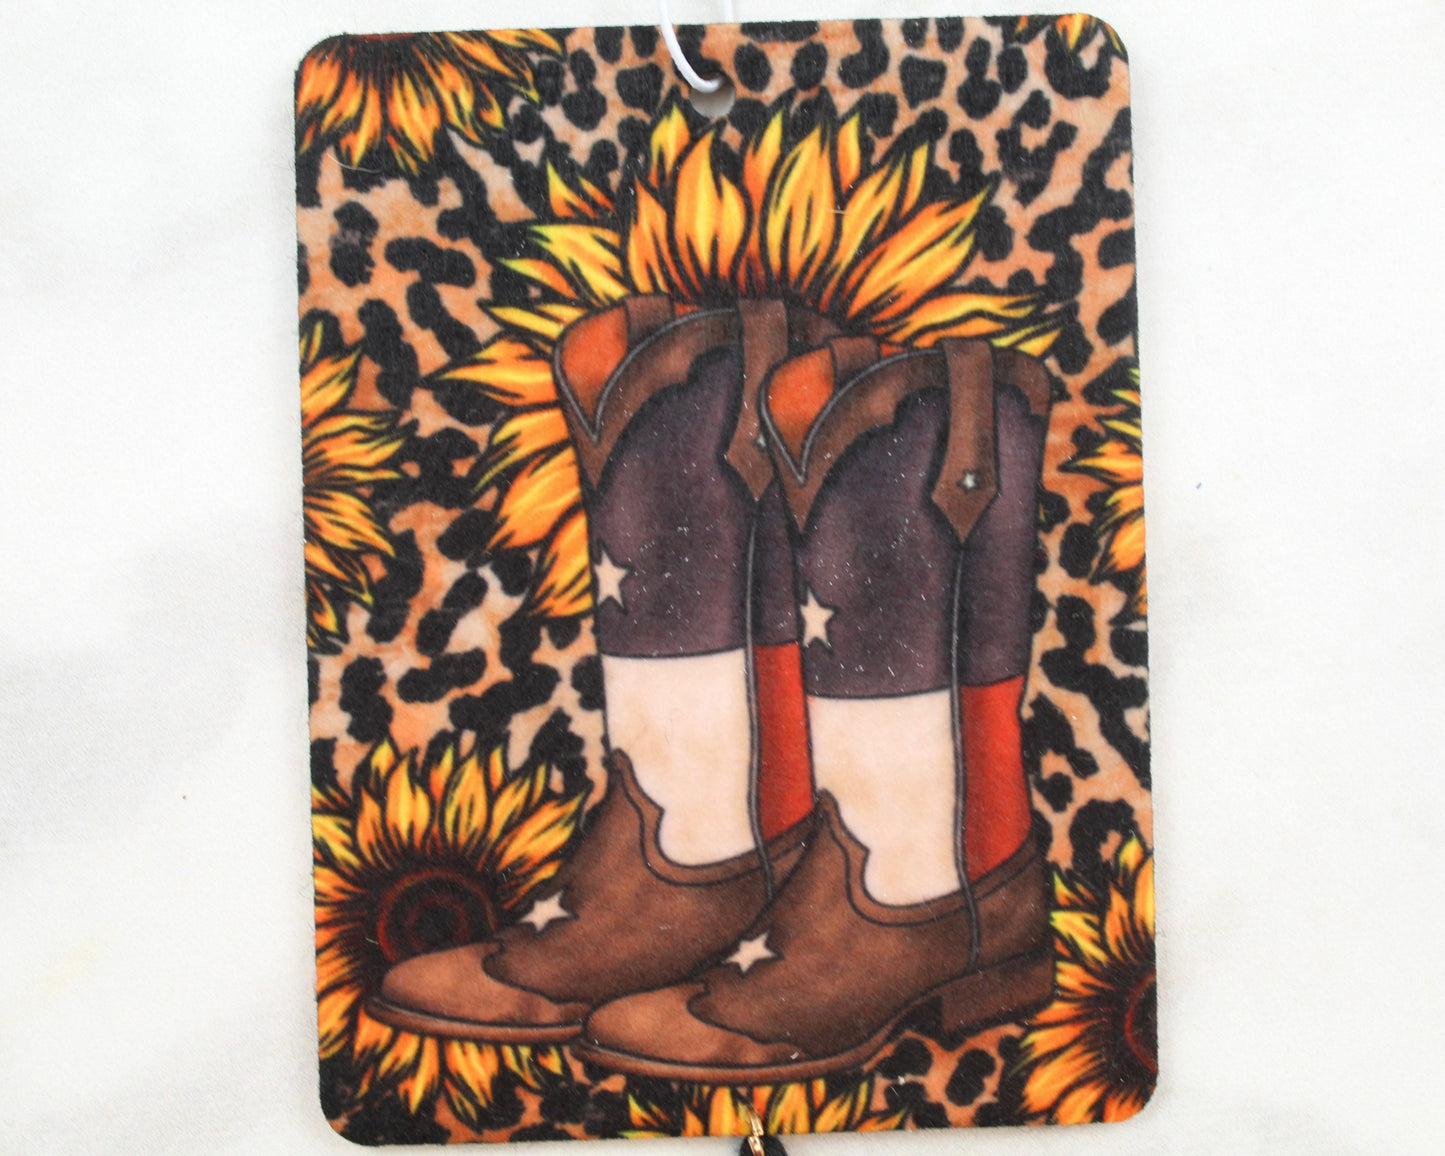 Texas Flag Cowboy Boots with Sunflowers and Cheetah Air Freshener Car Coaster Gift Set